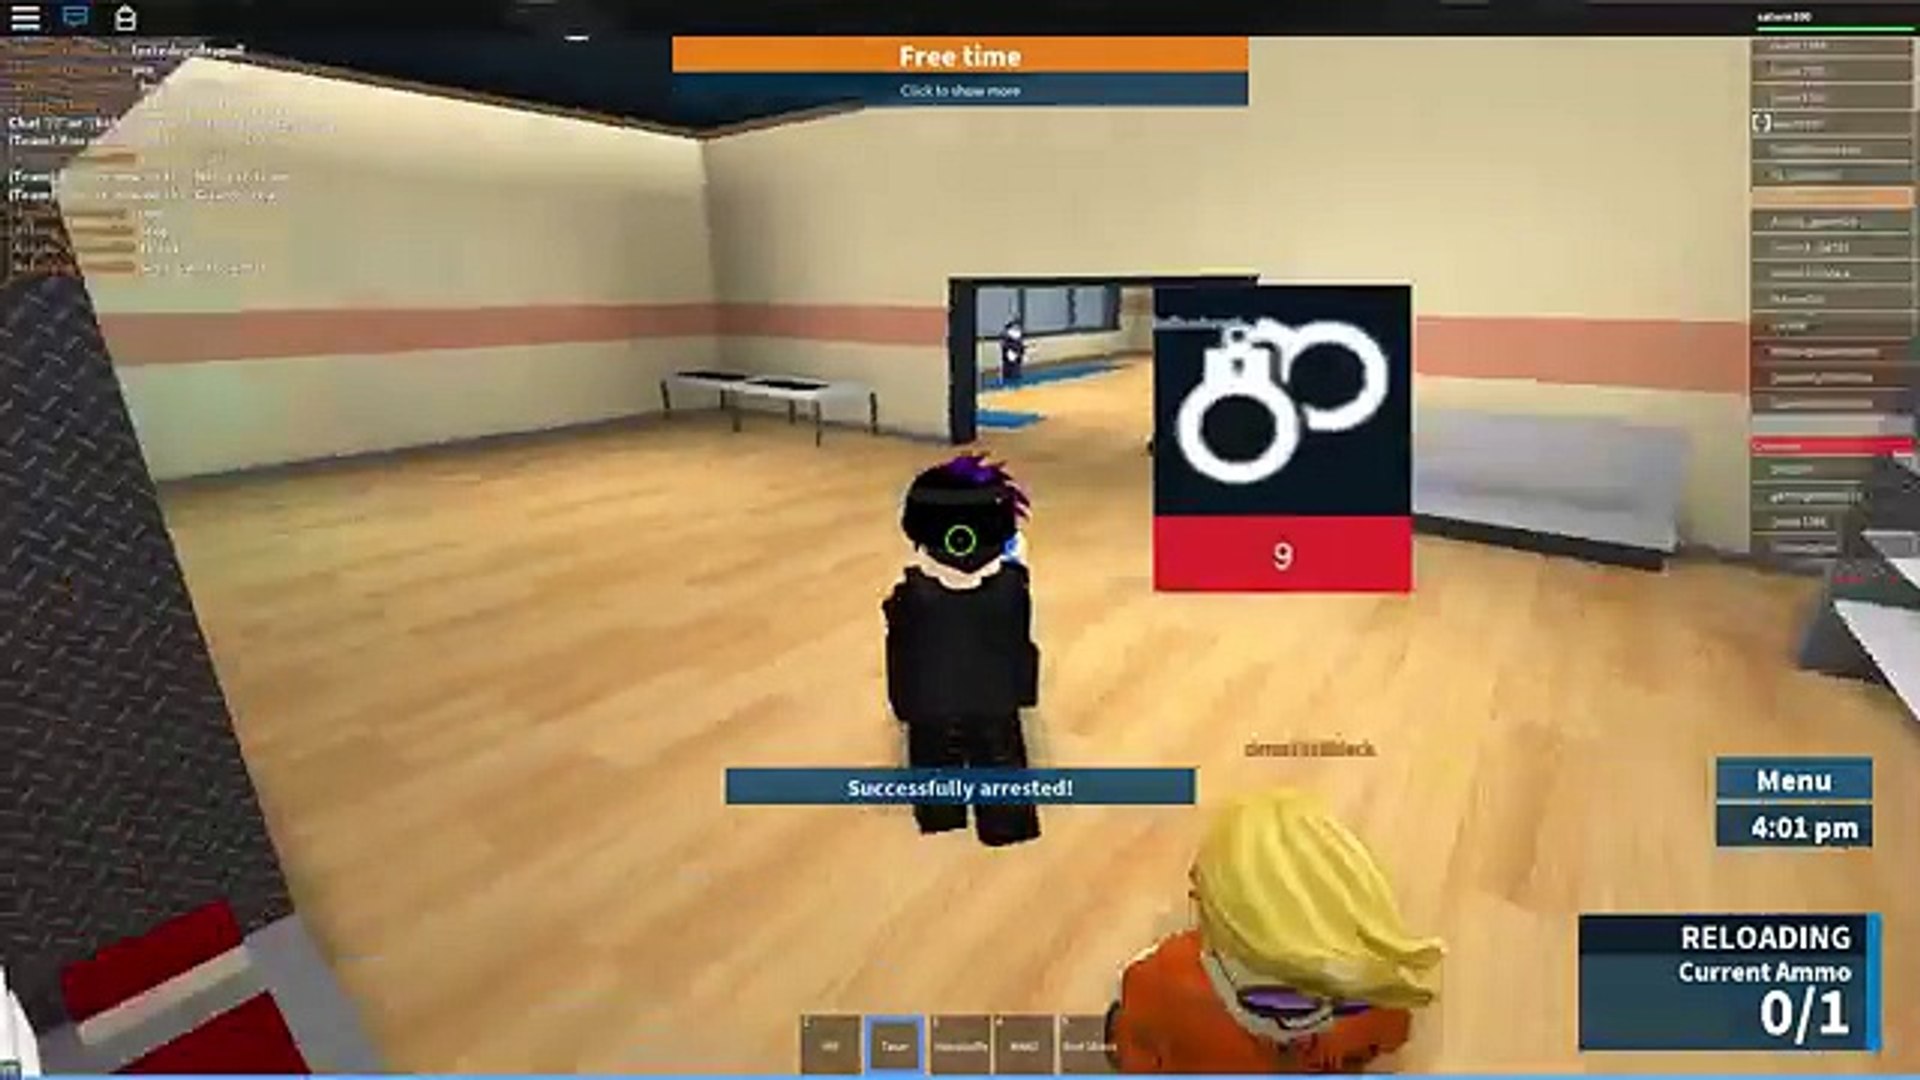 Roblox Prison Life V2 0 Buying The Swat Gear Roblox Fun Video Dailymotion - swat clothing roblox